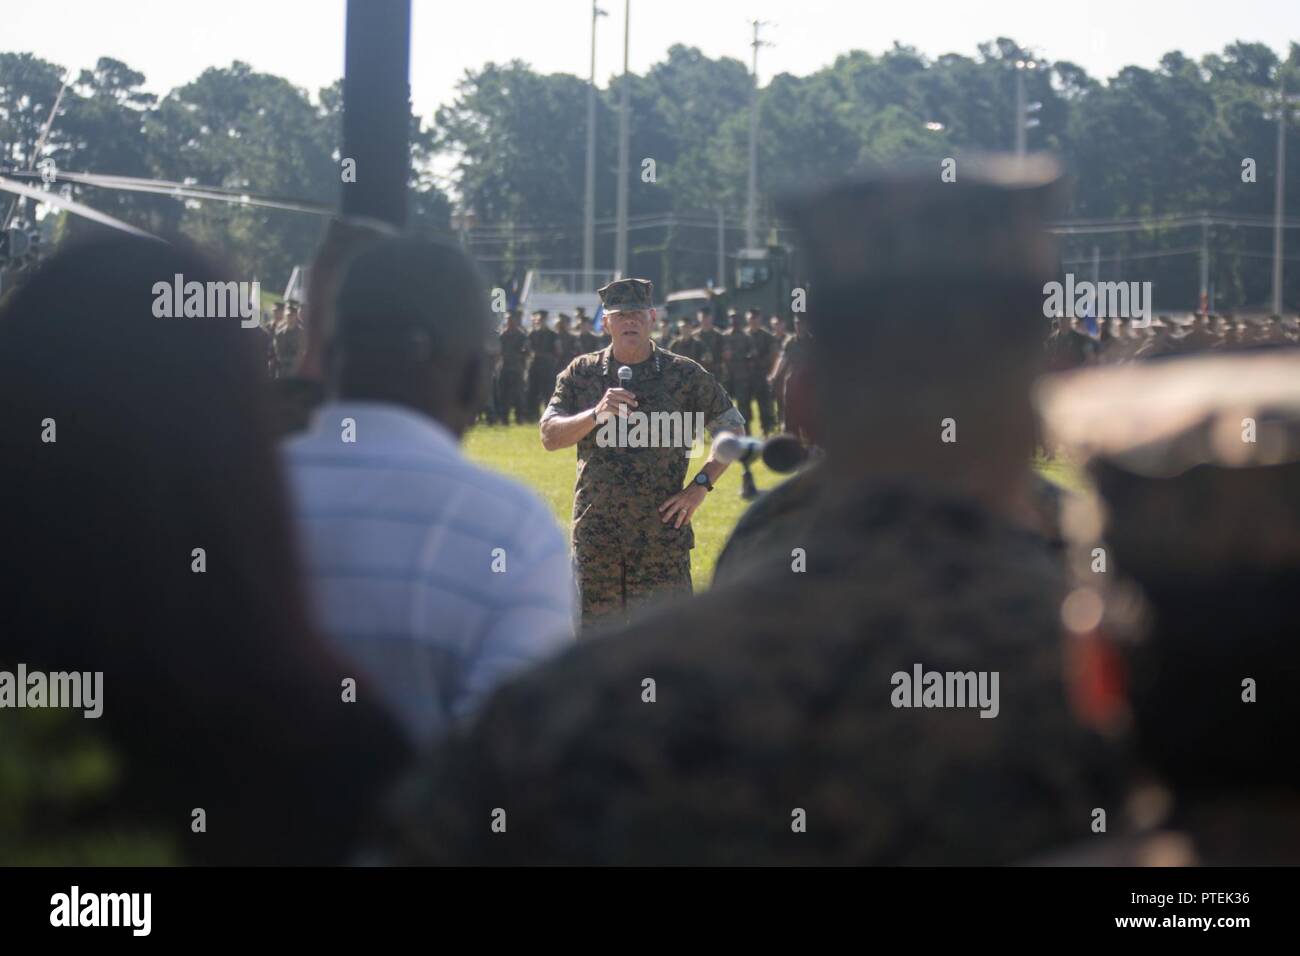 U.S. Marine Corps Gen. Robert B. Neller, Commandant of the Marine Corps, speaks during the II Marine Expeditionary Force (II MEF) change of command ceremony on Camp Lejeune, N.C., July 14, 2017. During the ceremony, Maj Gen. Walter L. Miller, Jr. relinquished his post as commanding general of II MEF to Lt. Gen. Robert F. Hedelund. Stock Photo